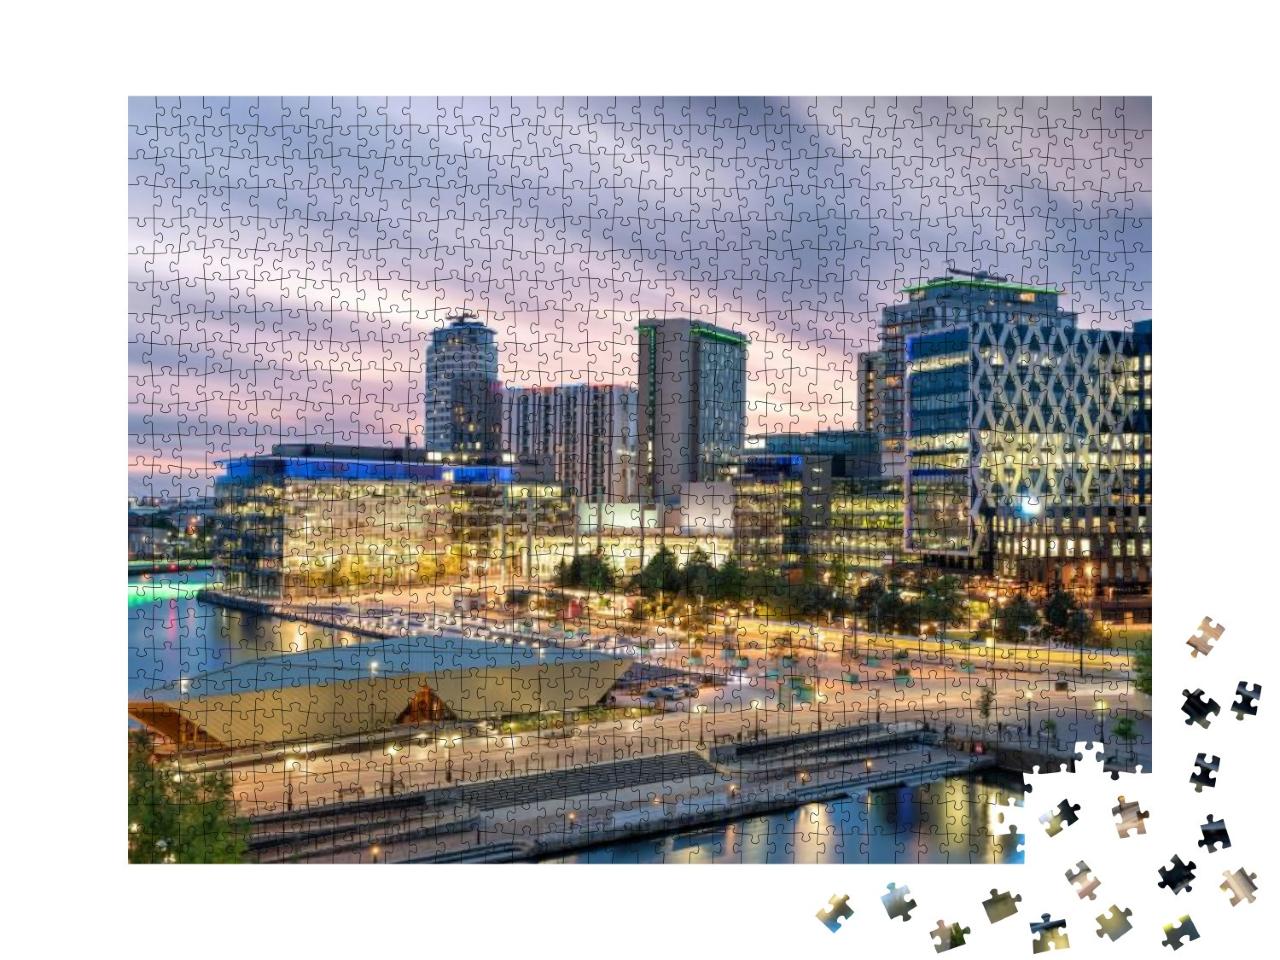 Puzzle 1000 Teile „Media City, Salford Quays, Manchester“